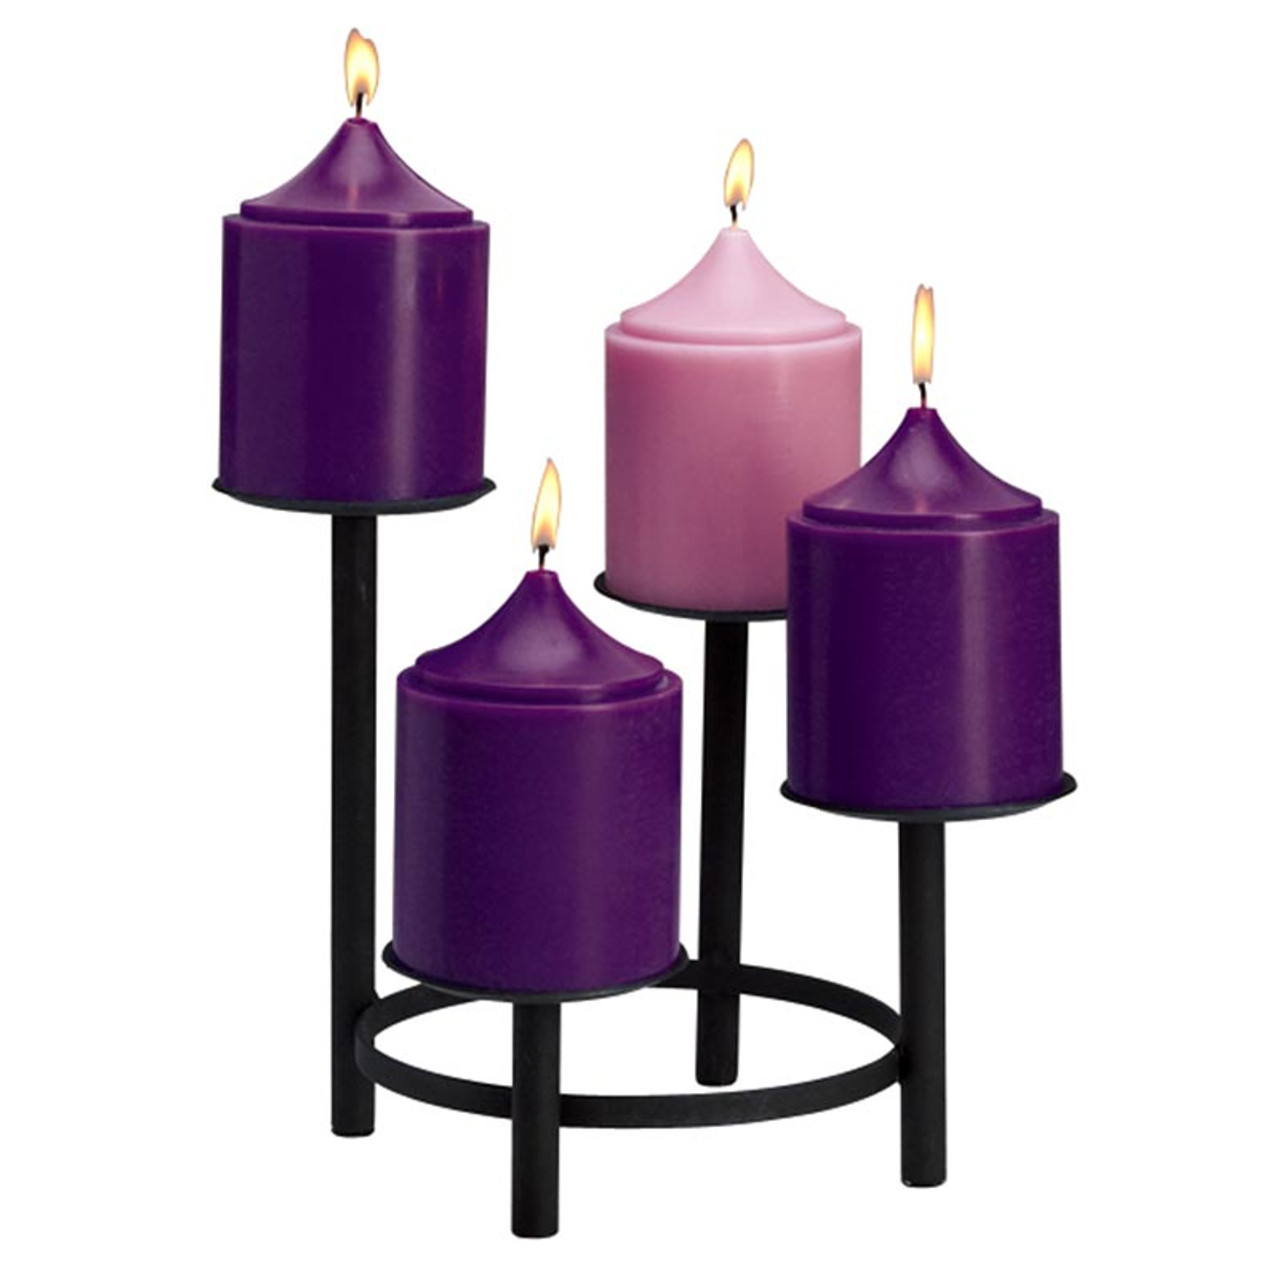 Church Candle Accessories  Bobeches, Candle Holders, Votives, Wax